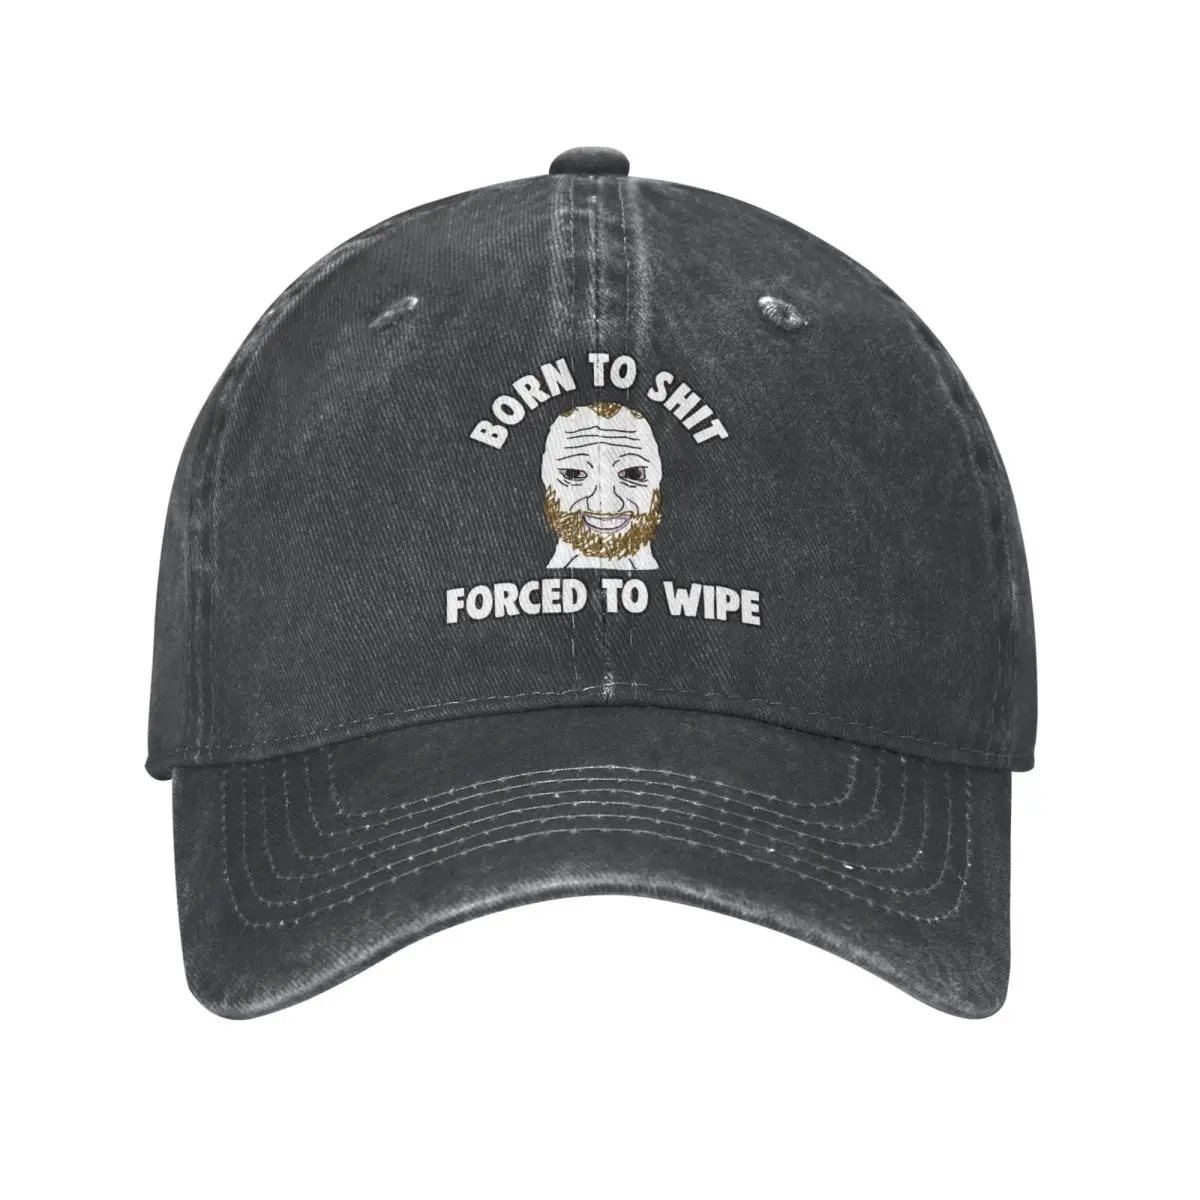 

Casual Parody Born To Shit Forced To Wipe Meme Baseball Cap Distressed Washed Snapback Cap Outdoor Summer Adjustable Fit Cap Hat